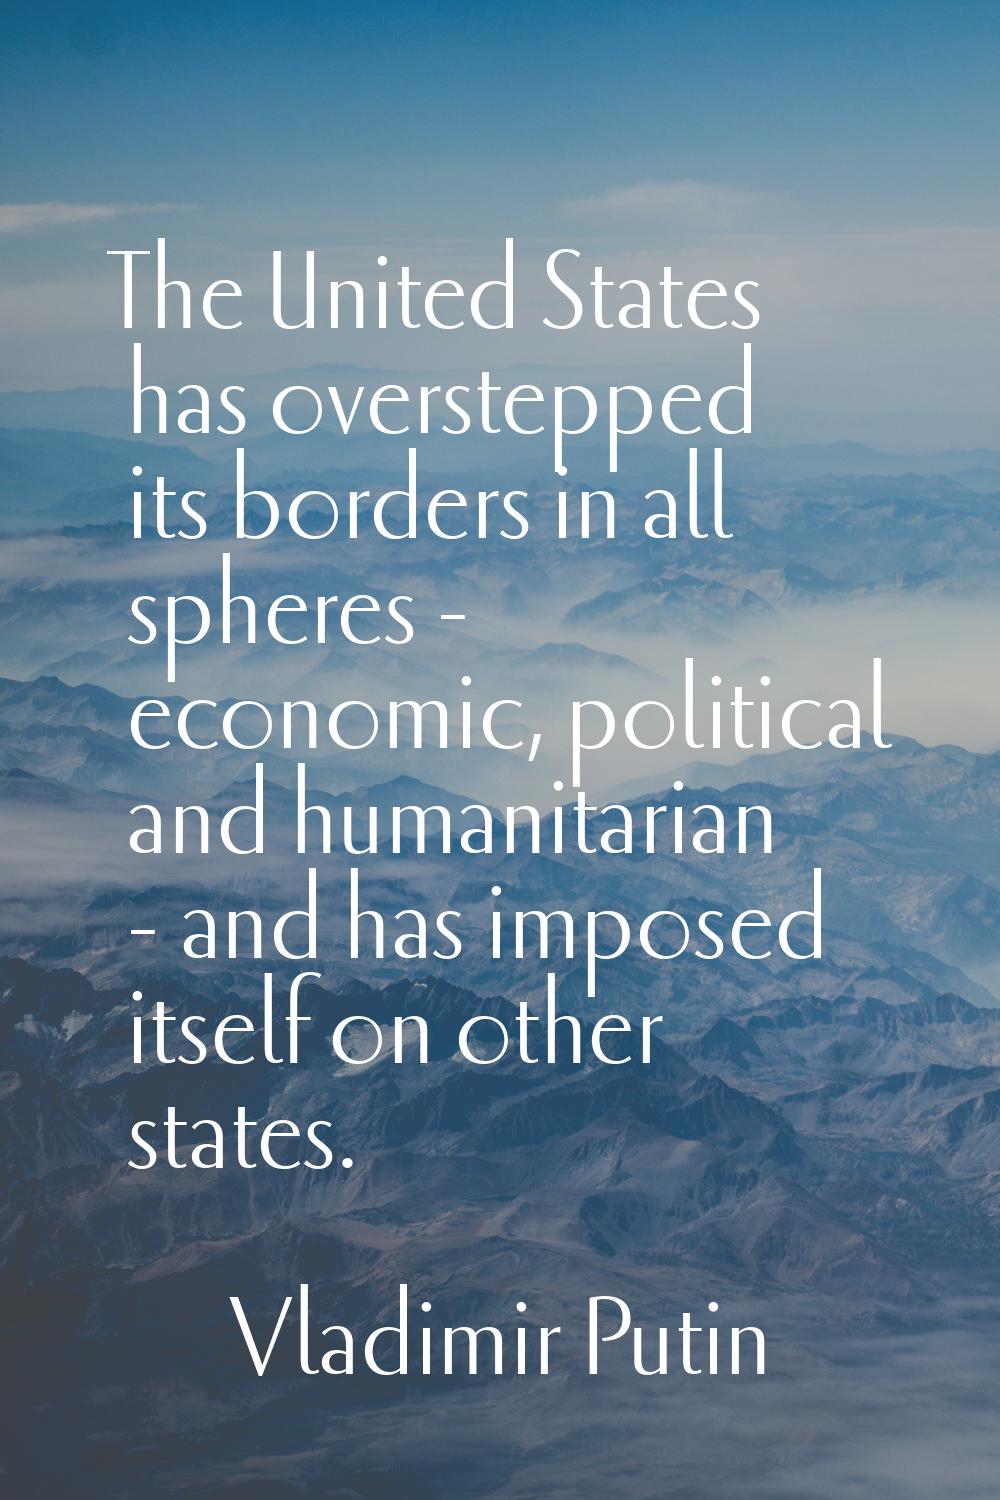 The United States has overstepped its borders in all spheres - economic, political and humanitarian